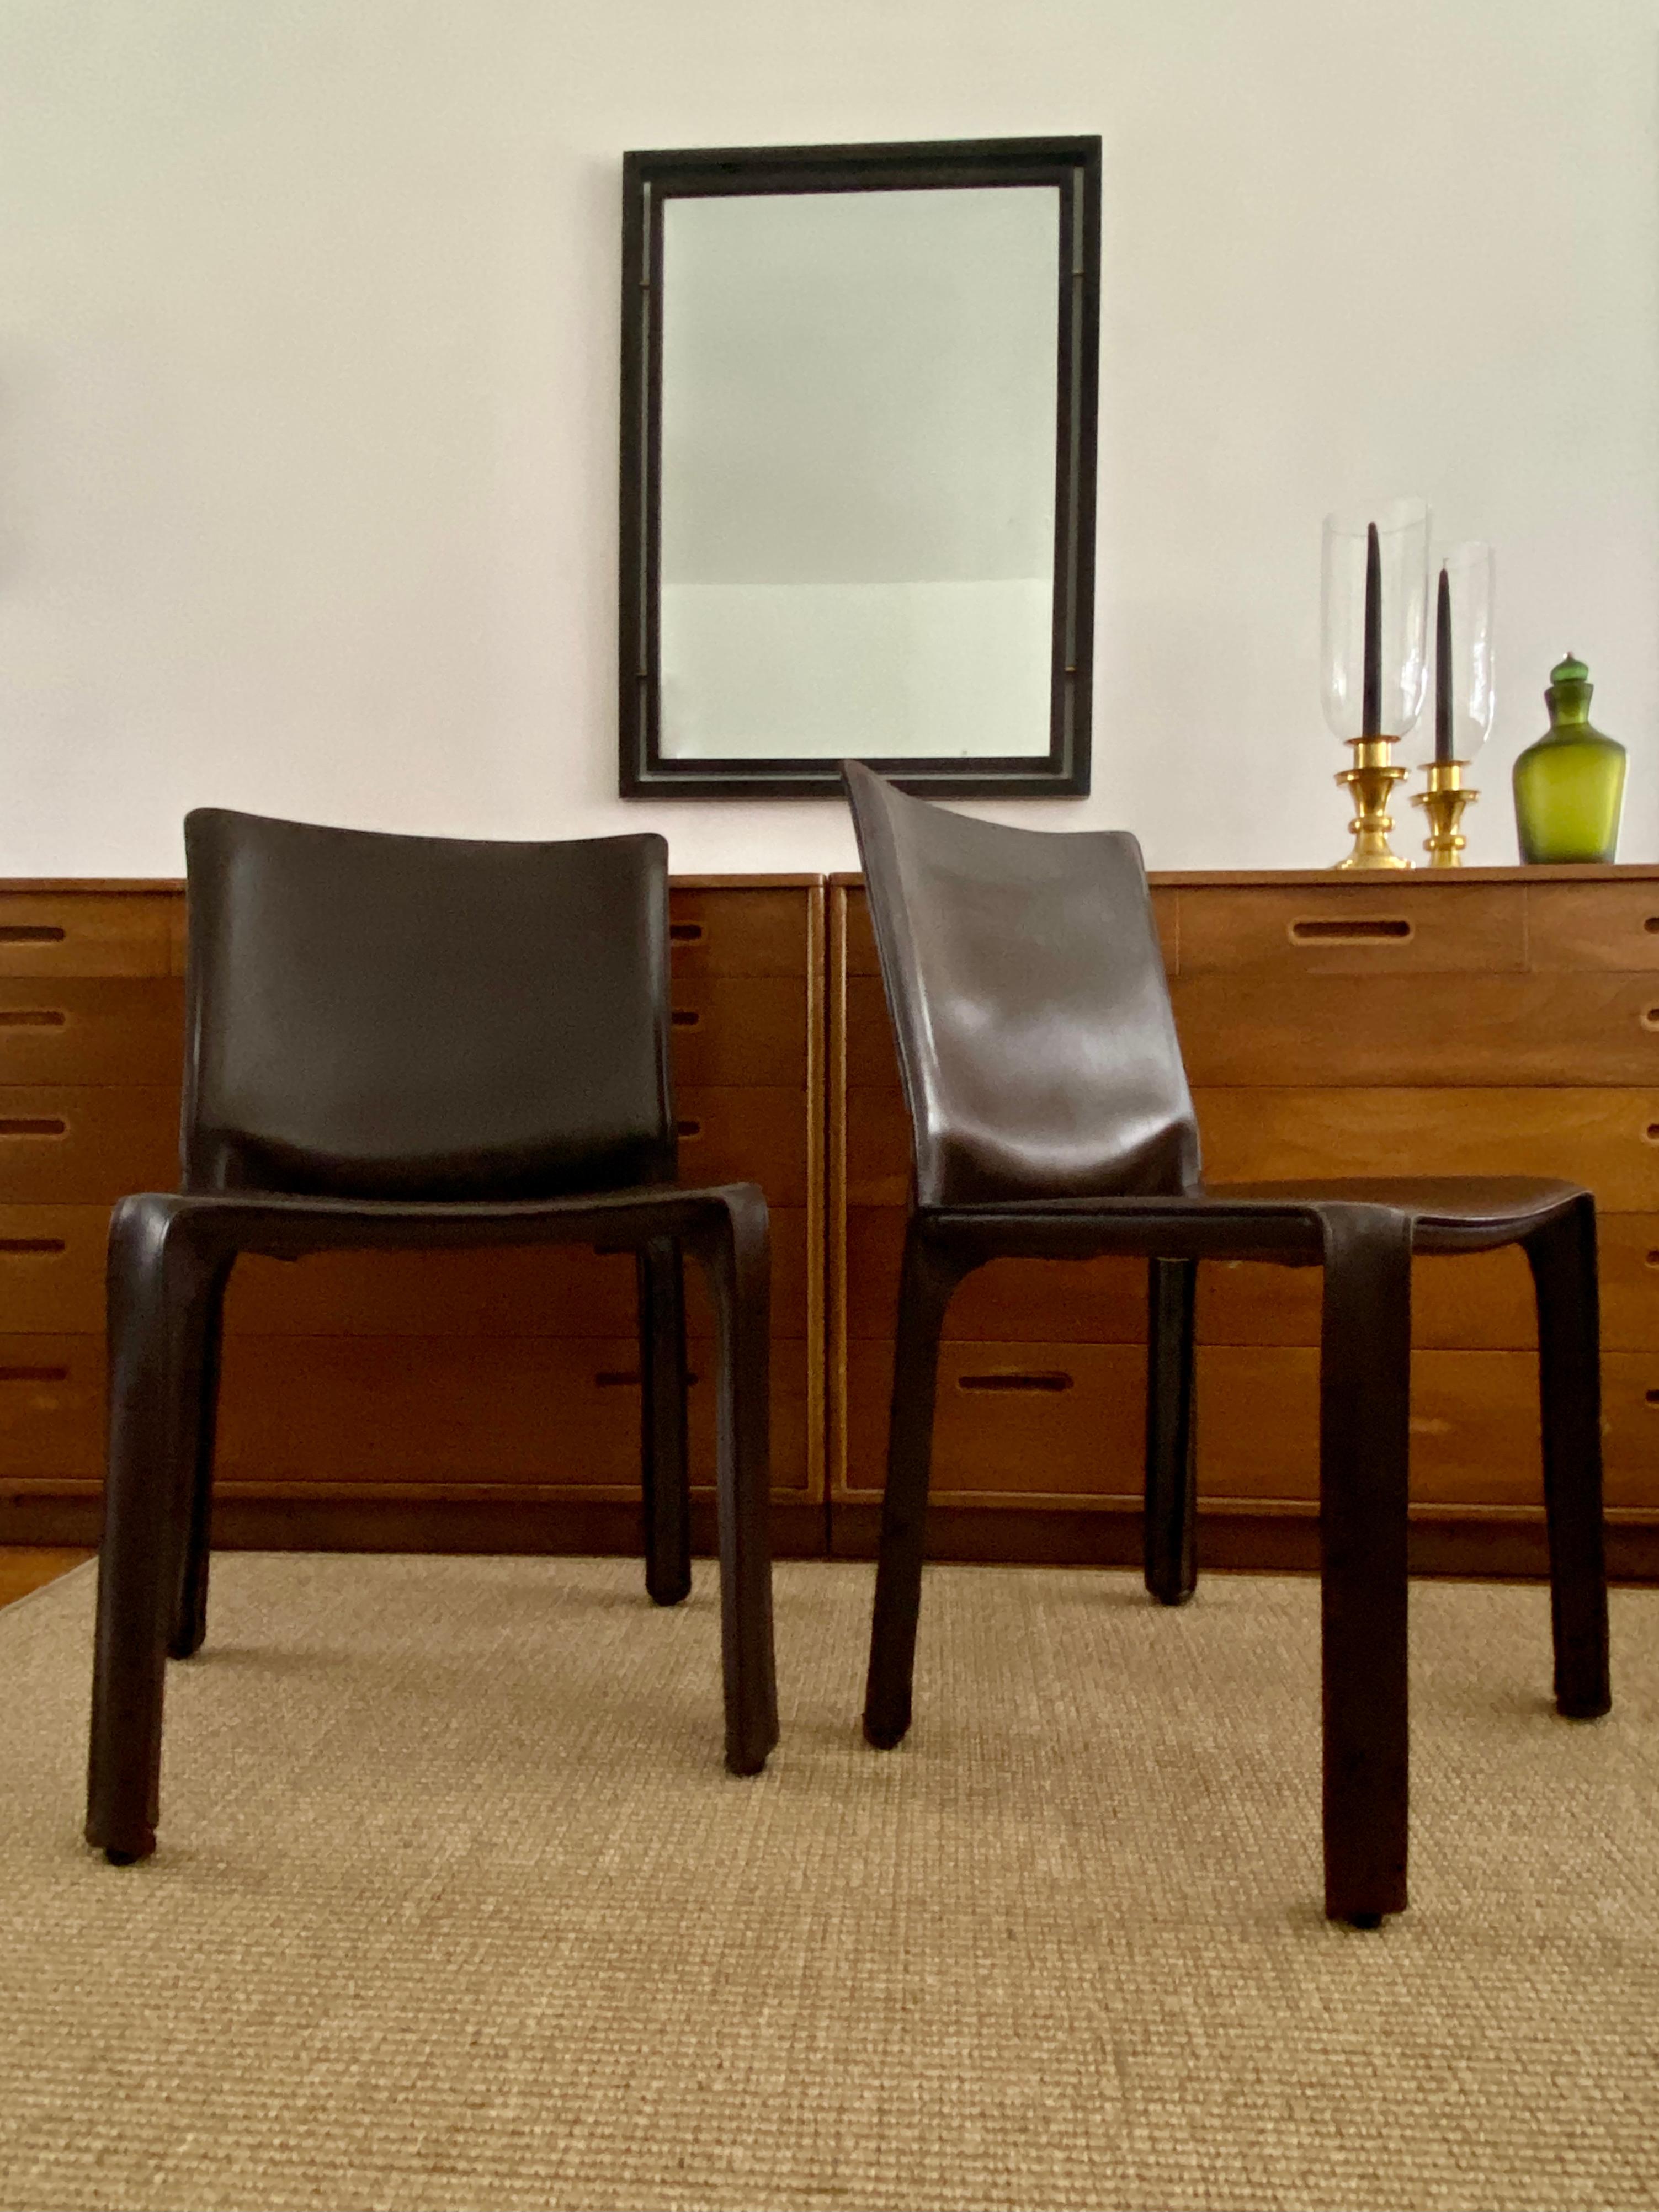 A pair of dark brown, saddle leather CAB 412 side chairs designed by Mario Bellini for Cassina in 1977. This pair of chairs are of newer production. The chairs stand approximately 32 inches tall at the back, 17 3/4 inches high at the seat, the seat